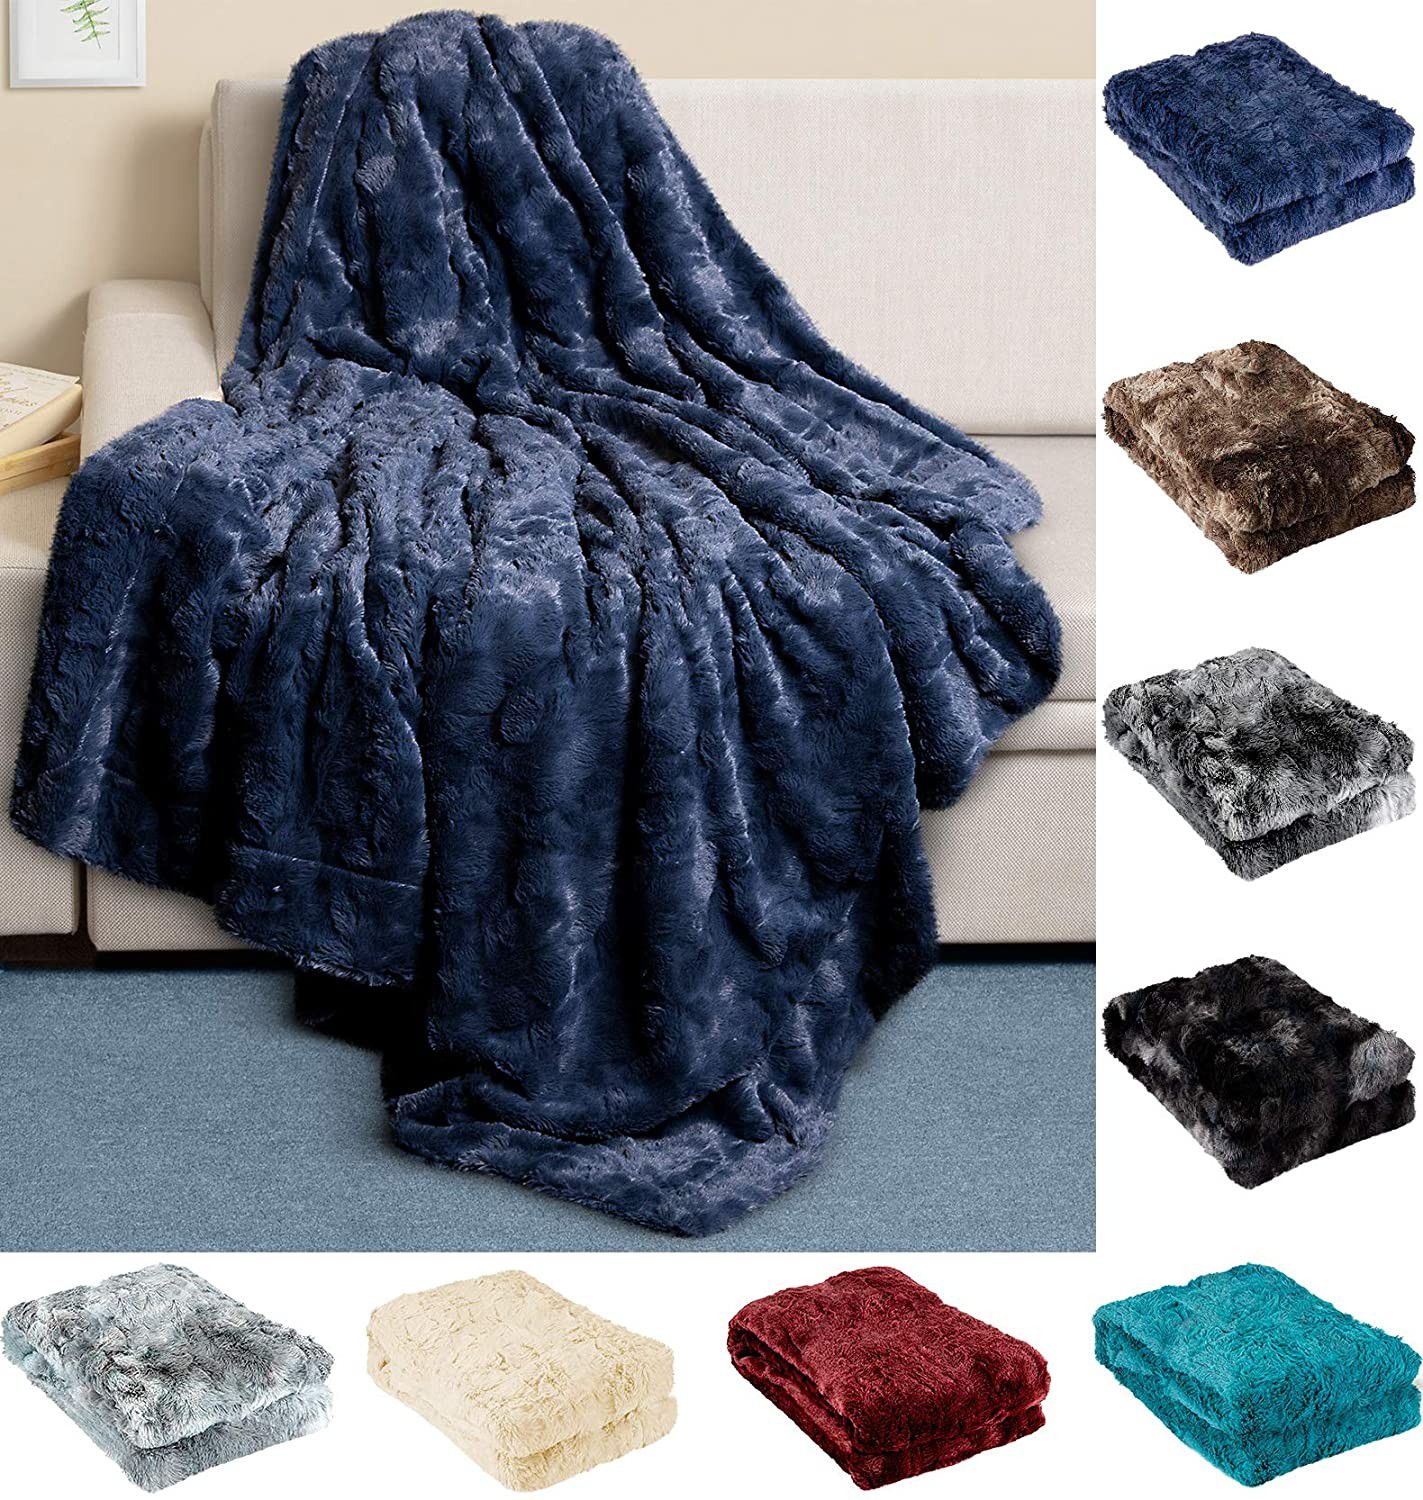 Luxury Faux Fur Throw Blanket - Ultra Soft and Fluffy - Plush Throw Blankets for Couch Bed and Living Room 50x65 (Full Size) Navy Blue